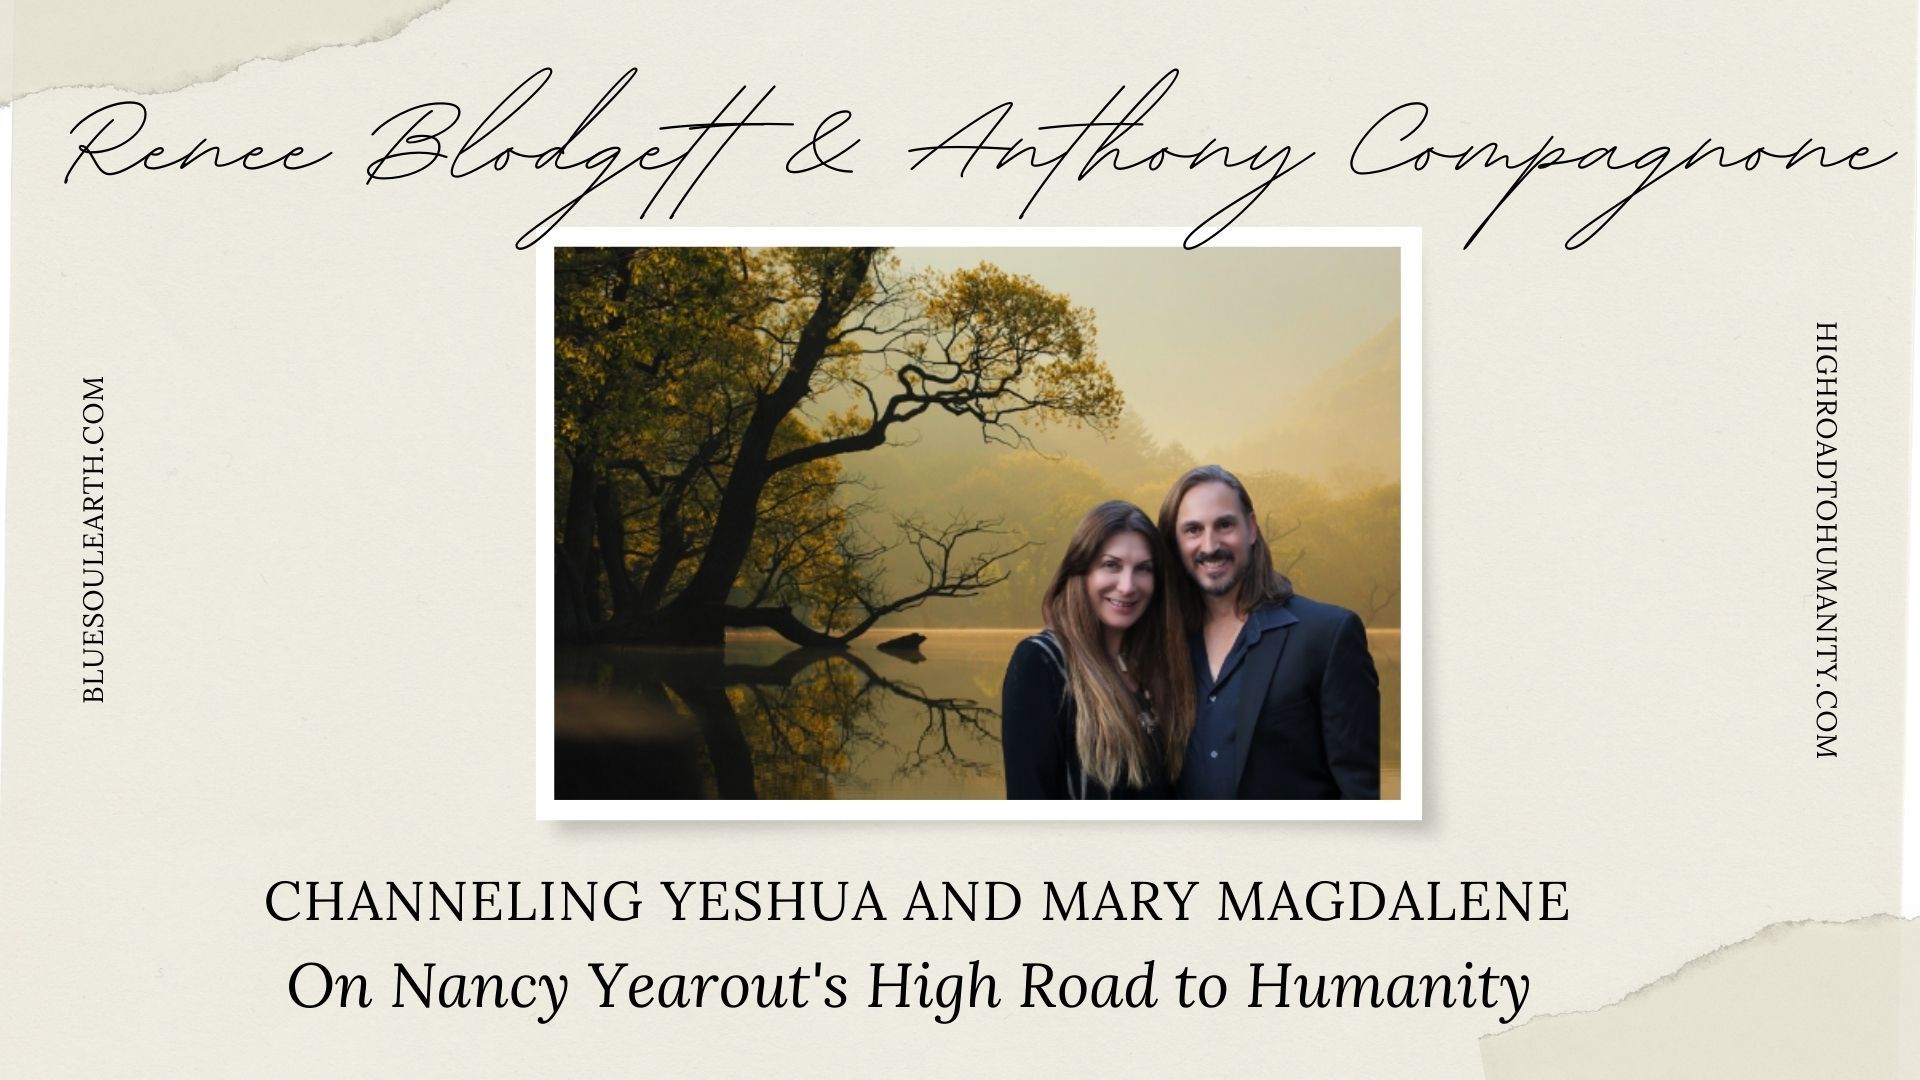 Yeshua and Mary Magdalene Channeled Messages by Renee Blodgett & Anthony Compagnone on High Road